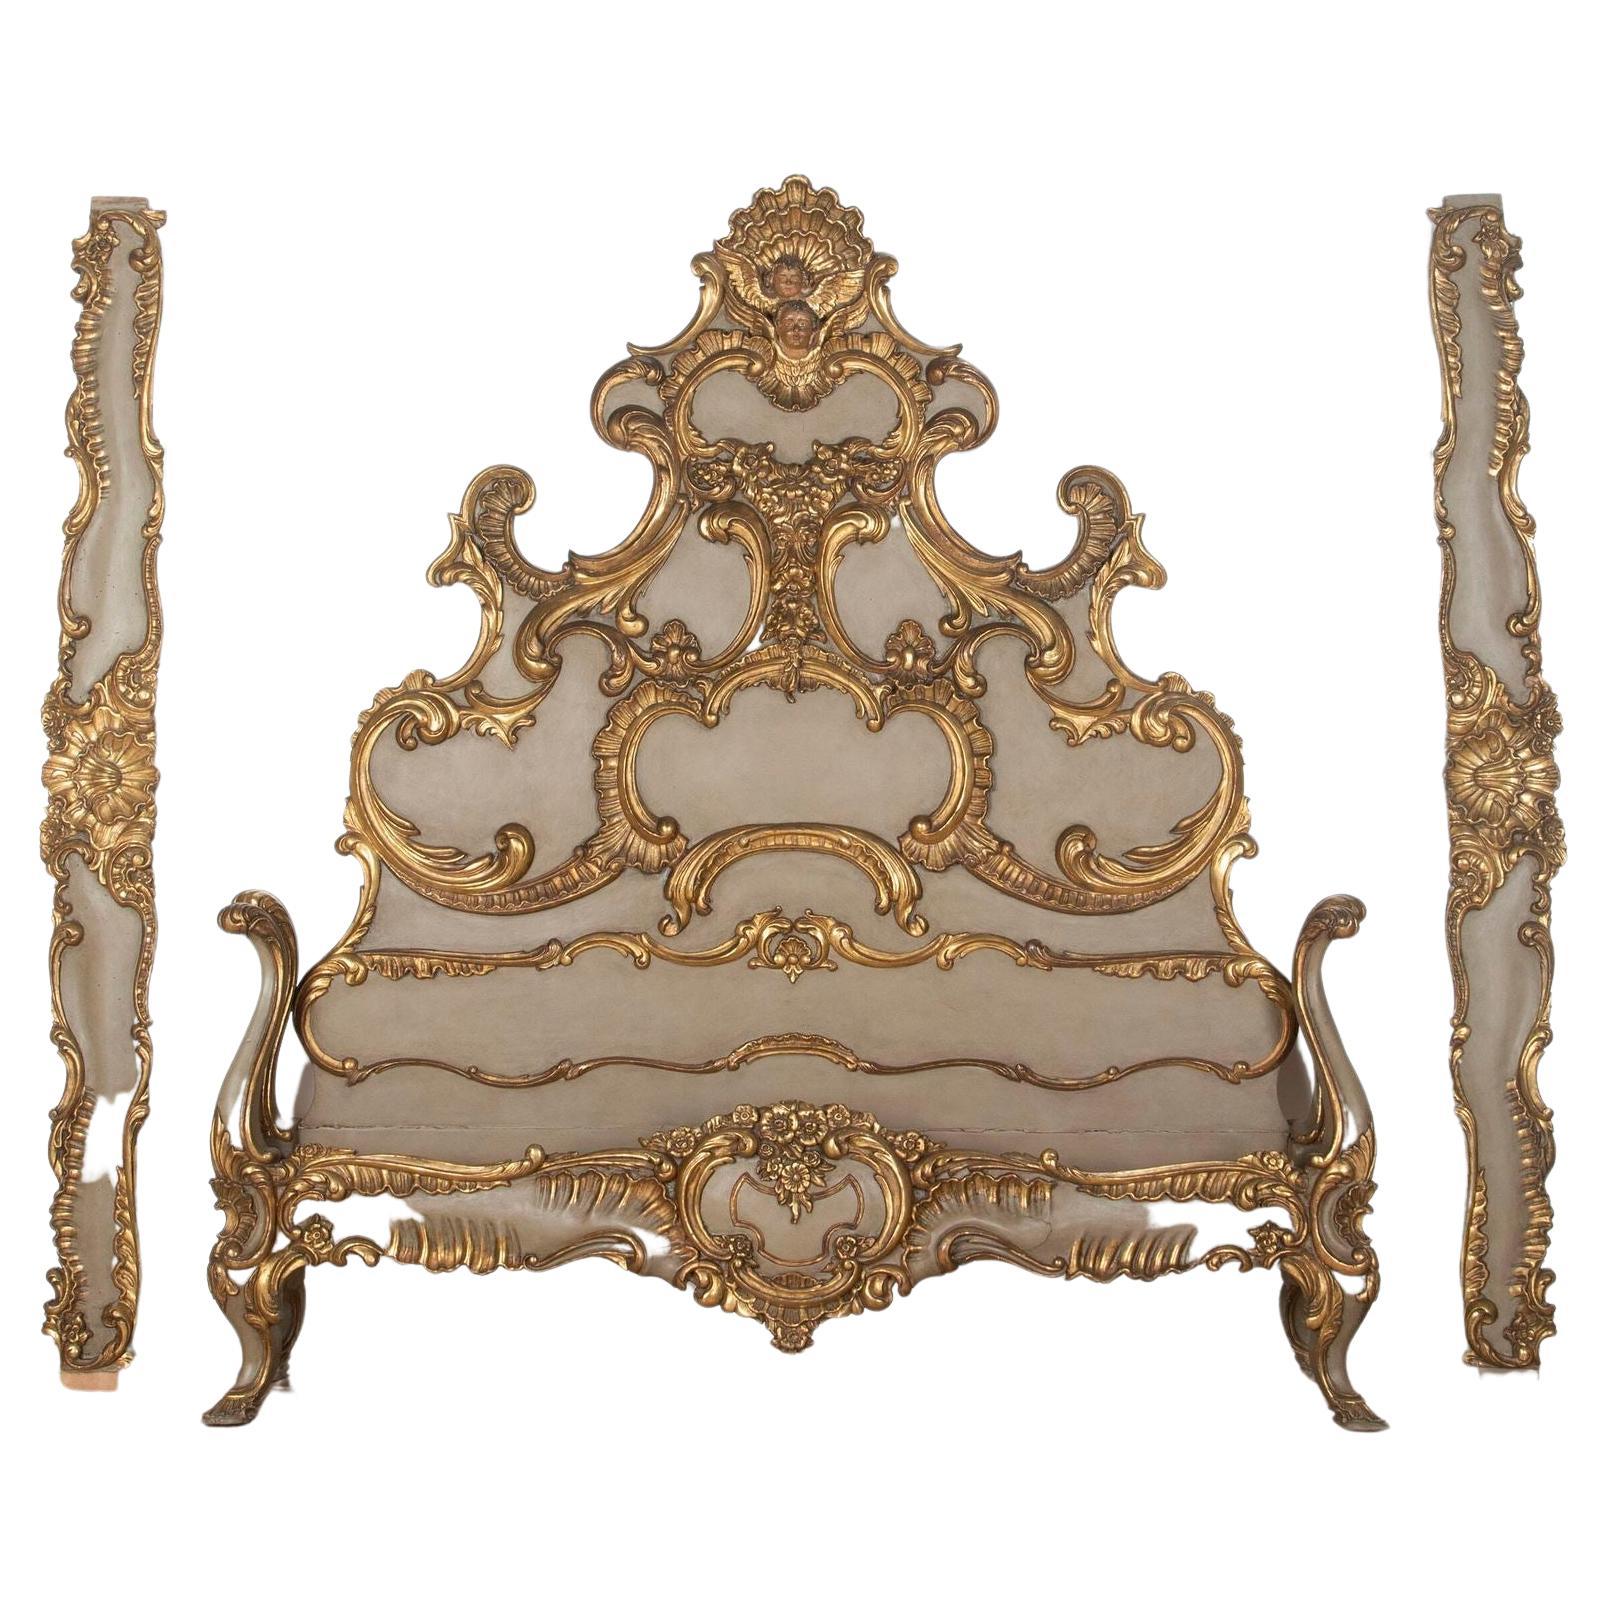 19th Century Florentine Baroque Giltwood Bedstead For Sale